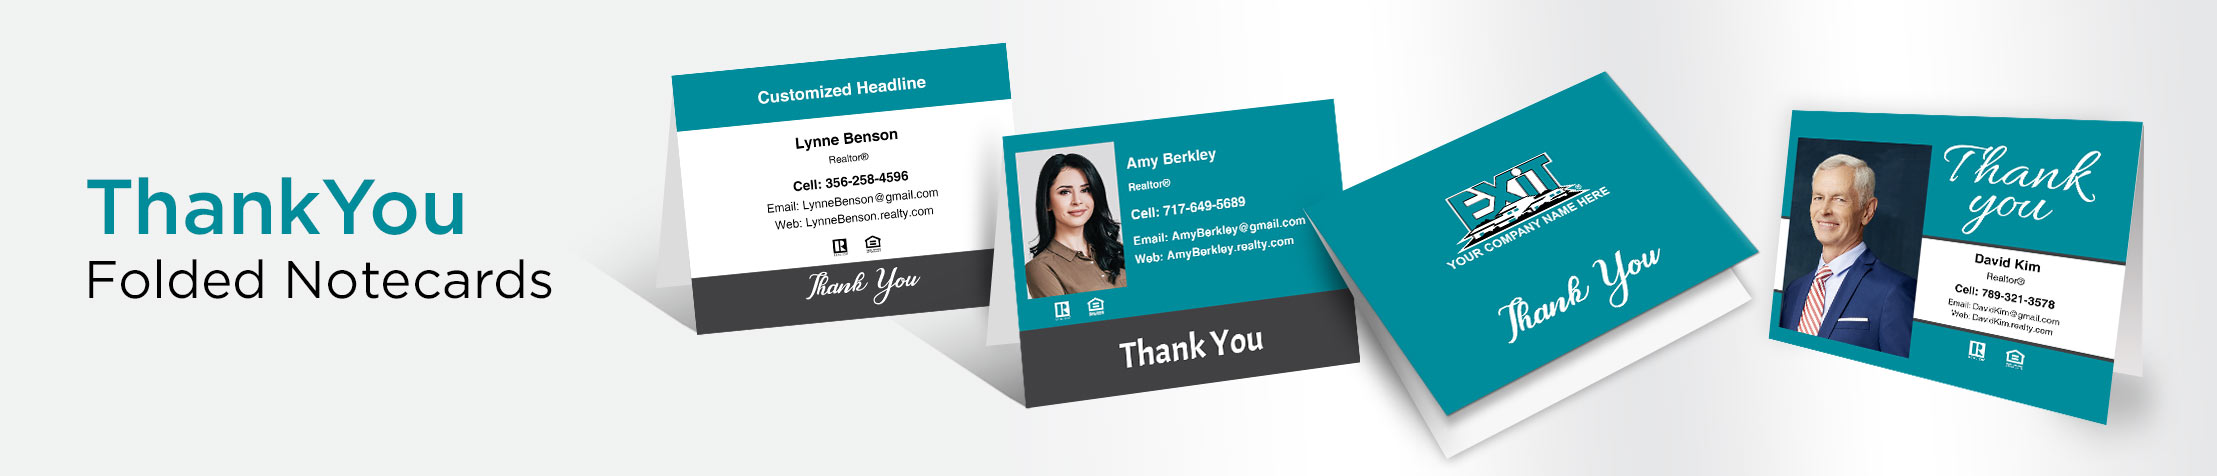 Exit Realty Thank You Folded Note Cards - Exit Realty approved vendor thank you cards stationery | BestPrintBuy.com